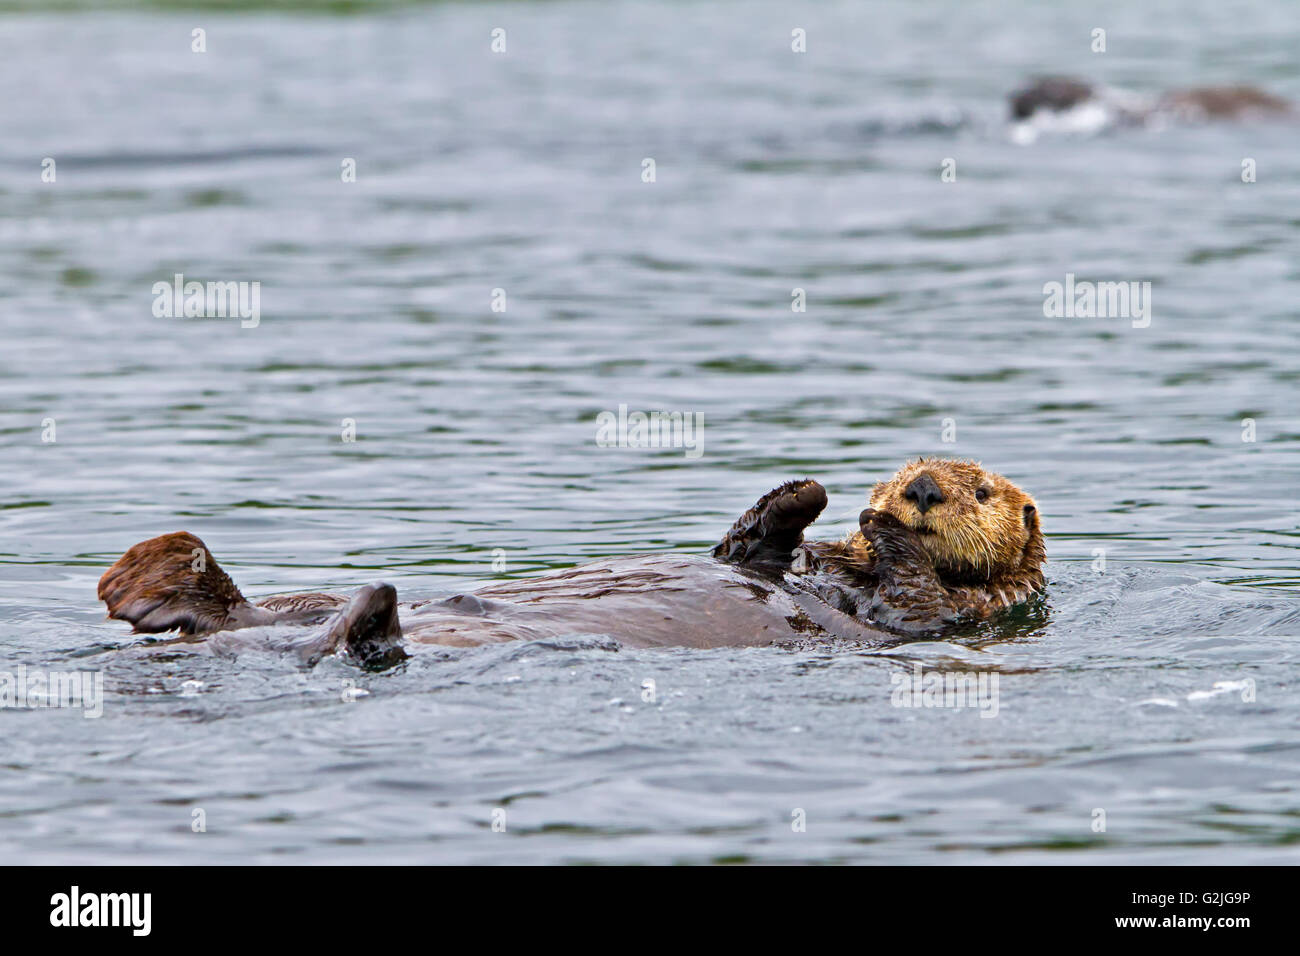 Sea otter Enhydra lutris belongs weasel family photographed of west coast of northern Vancouver Island British Columbia Canada. Stock Photo